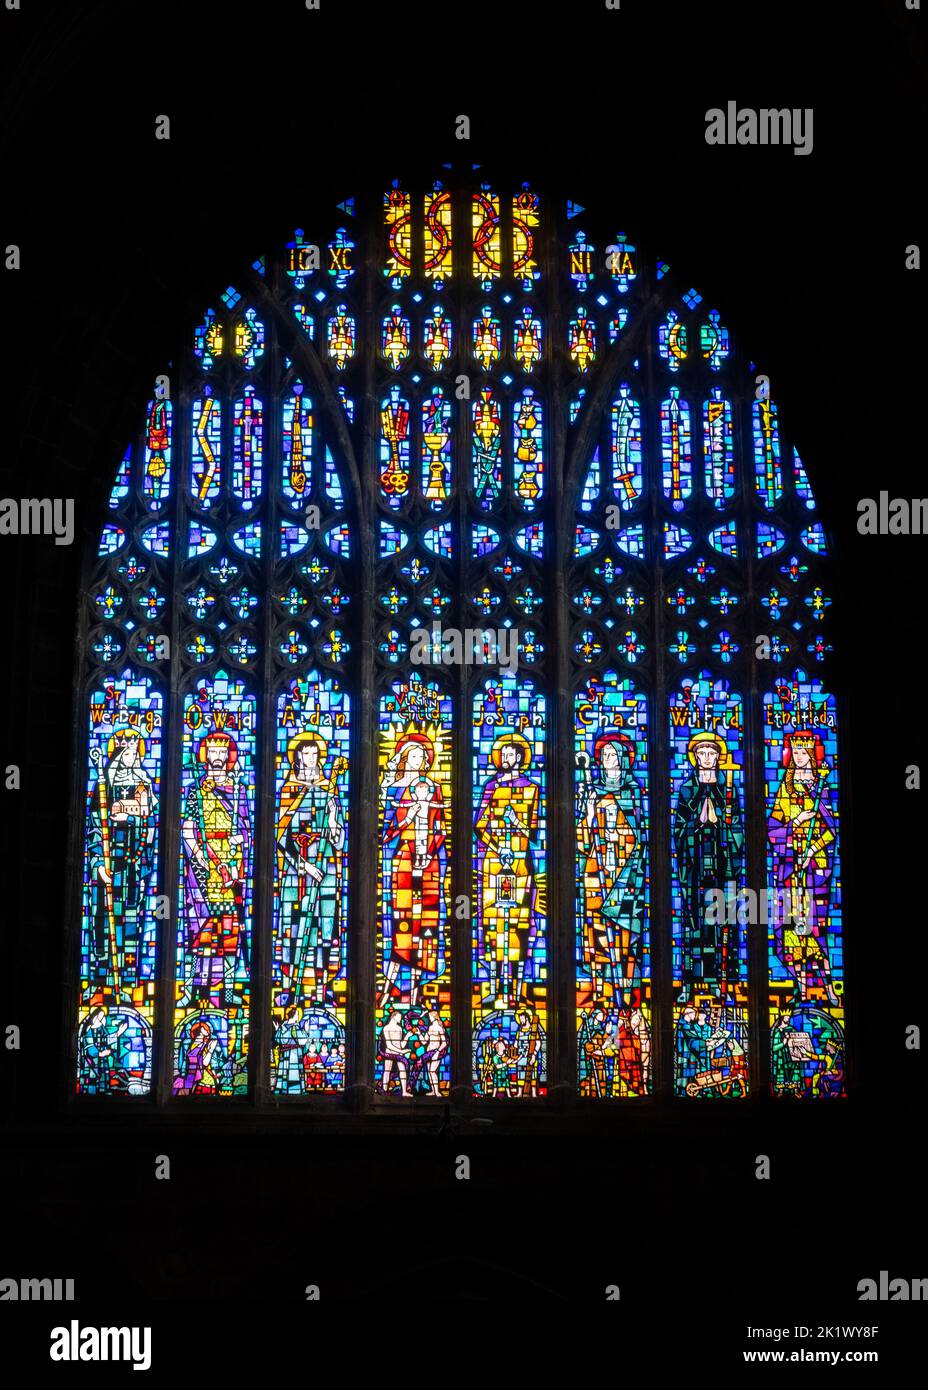 Chester, United Kingdom - 26 August, 2022: close-up view of a colorful stained glass window in the Chester Cathedral in Cheshire Stock Photo